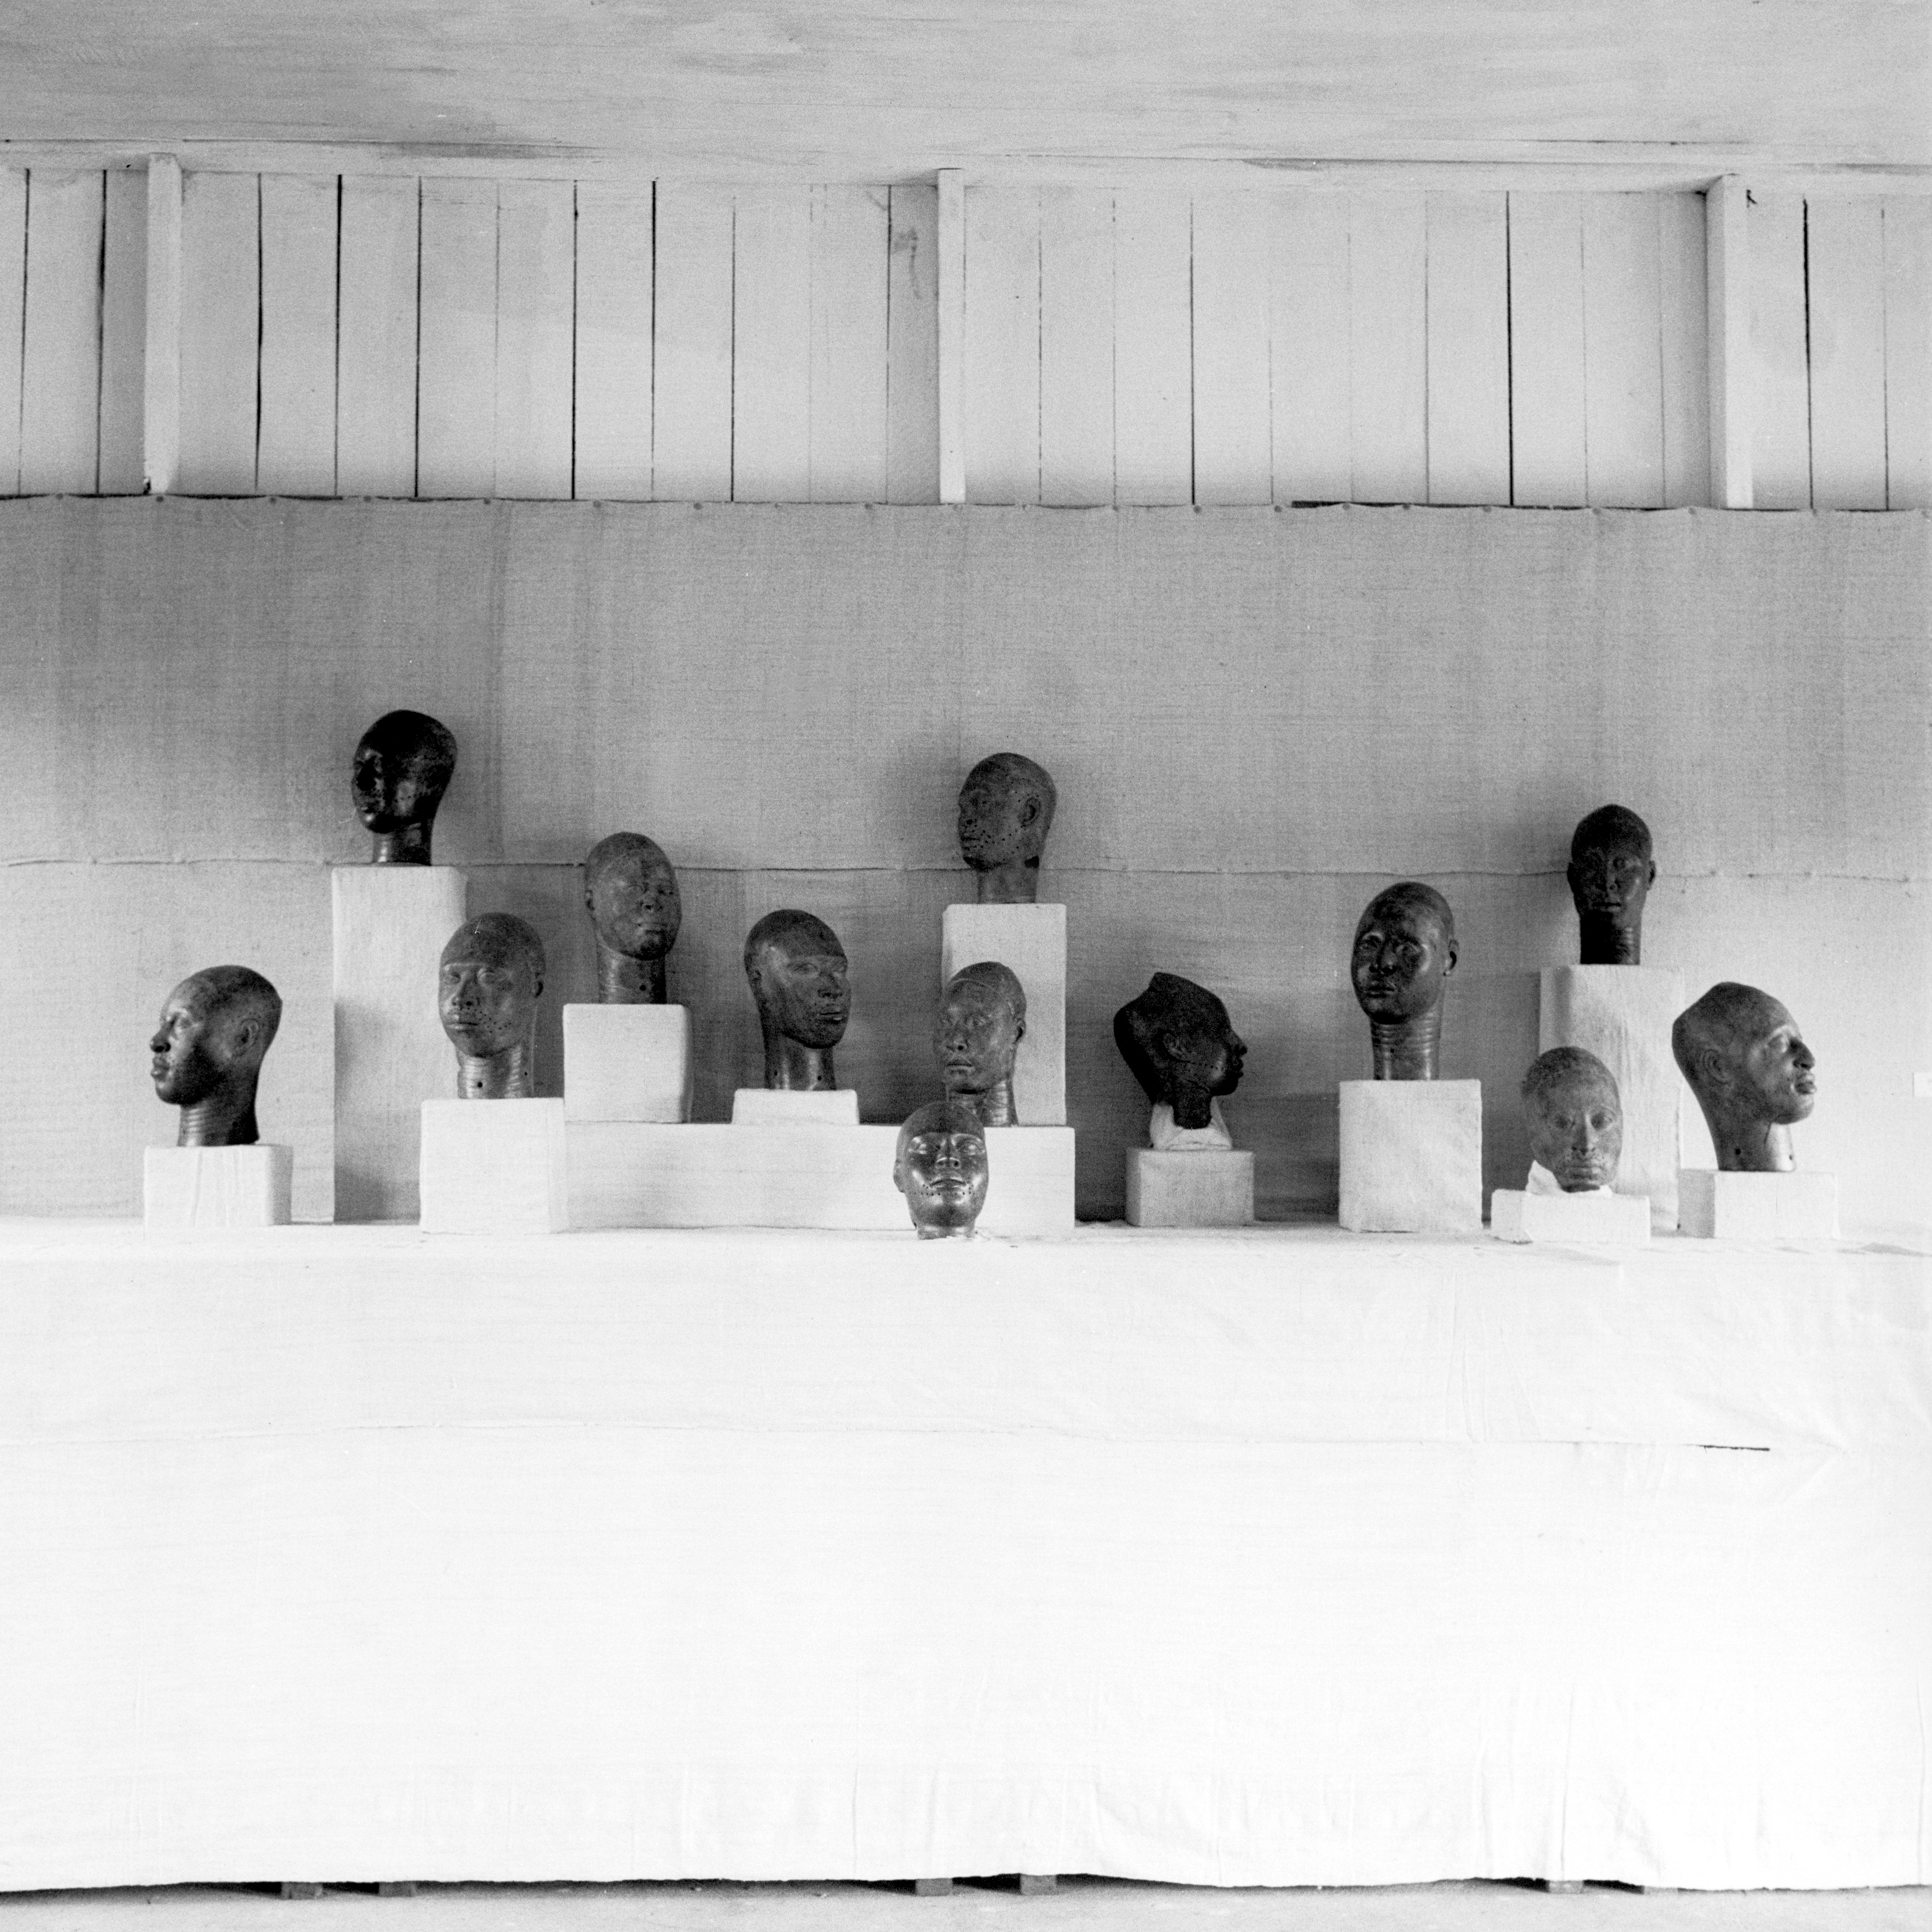 Image 3: Ifẹ̀ heads at an exhibition in Ibadan, Nigeria in 1949. Photograph by William Buller Fagg © RAI.